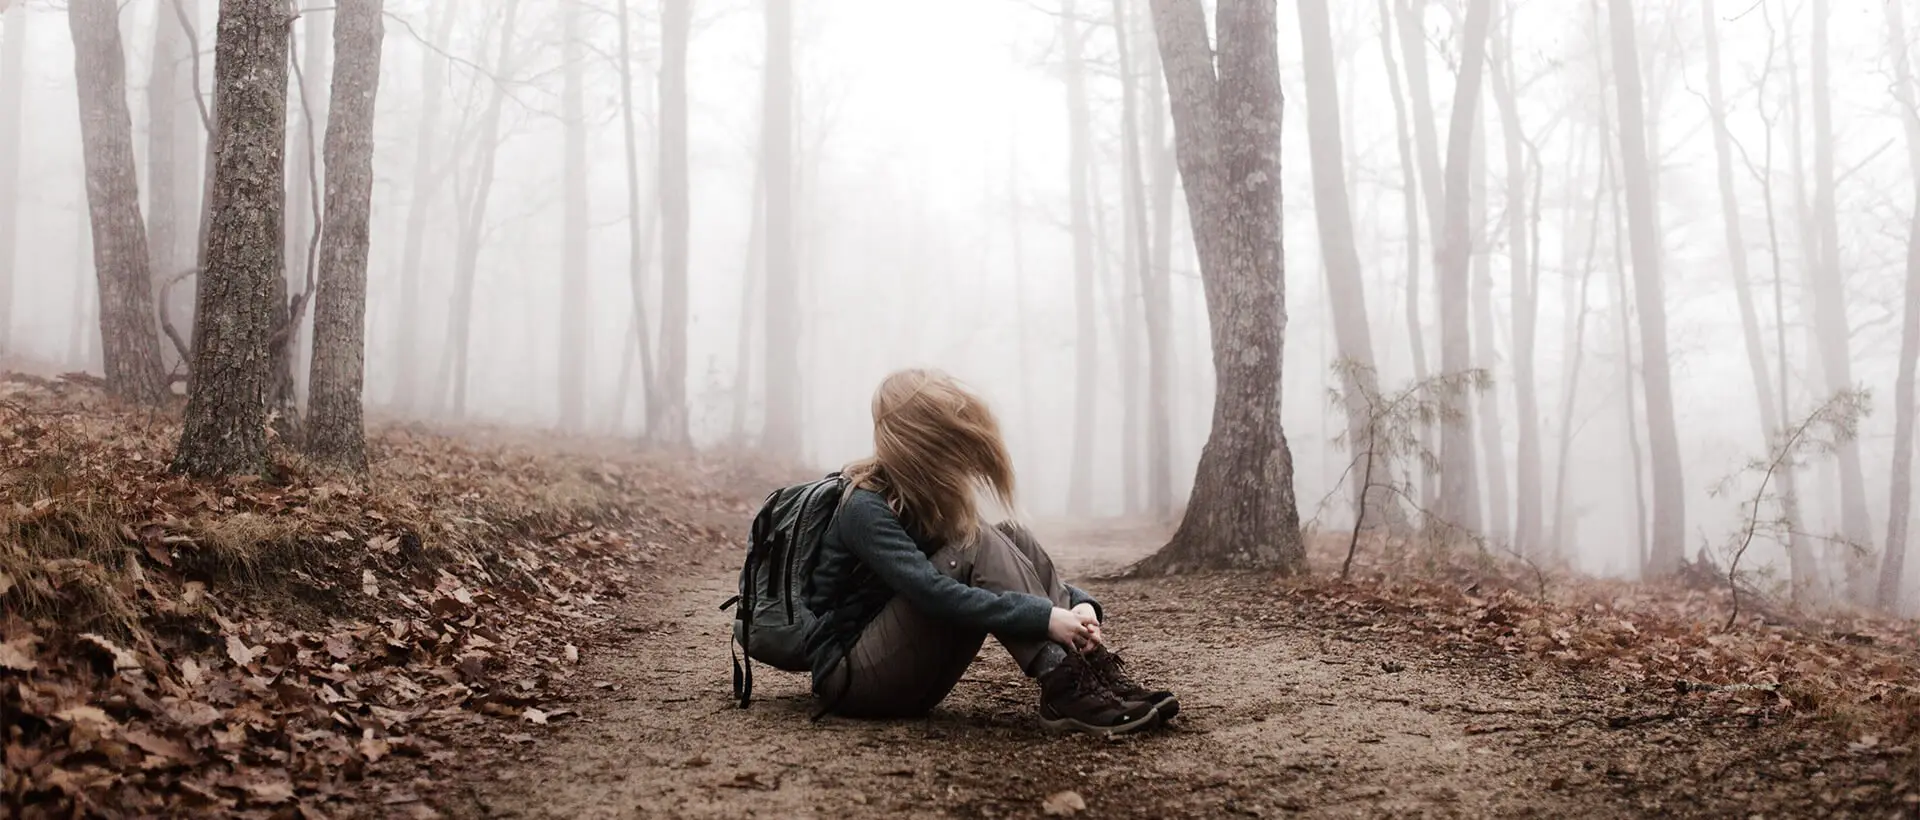 a woman sitting on a trail in a foggy forest.